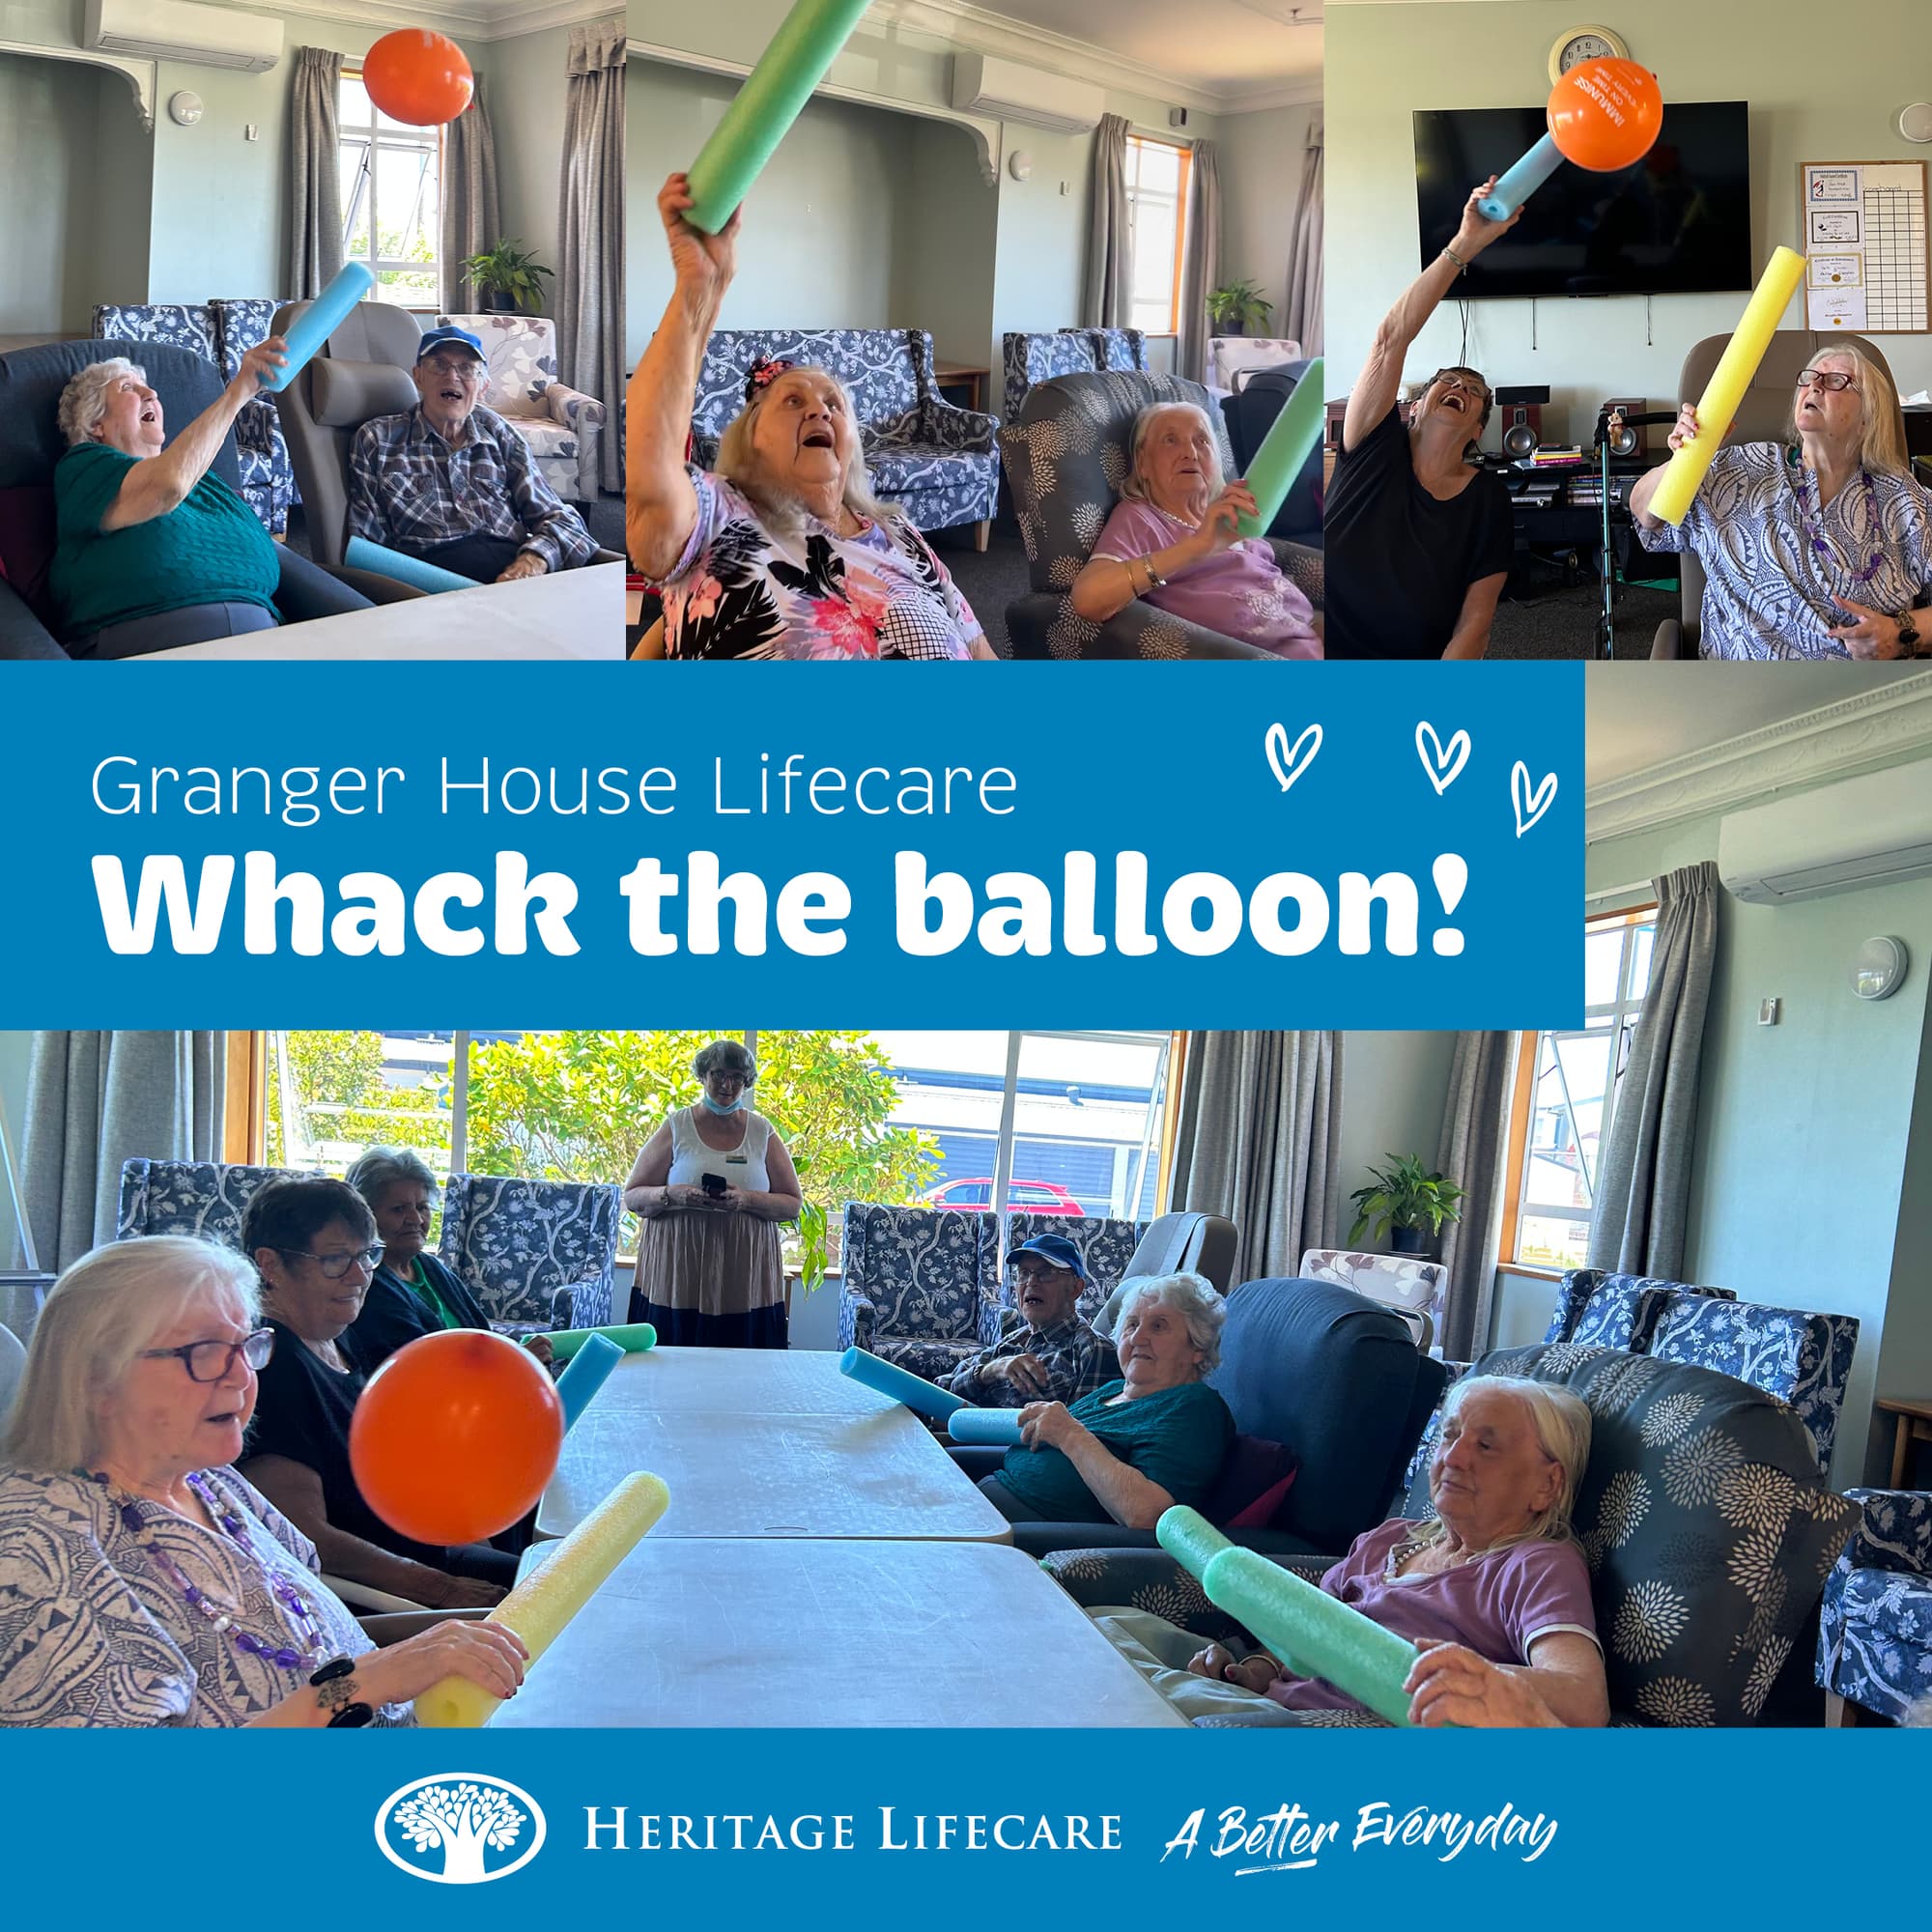 News & events • Whack the Balloon • Heritage Lifecare